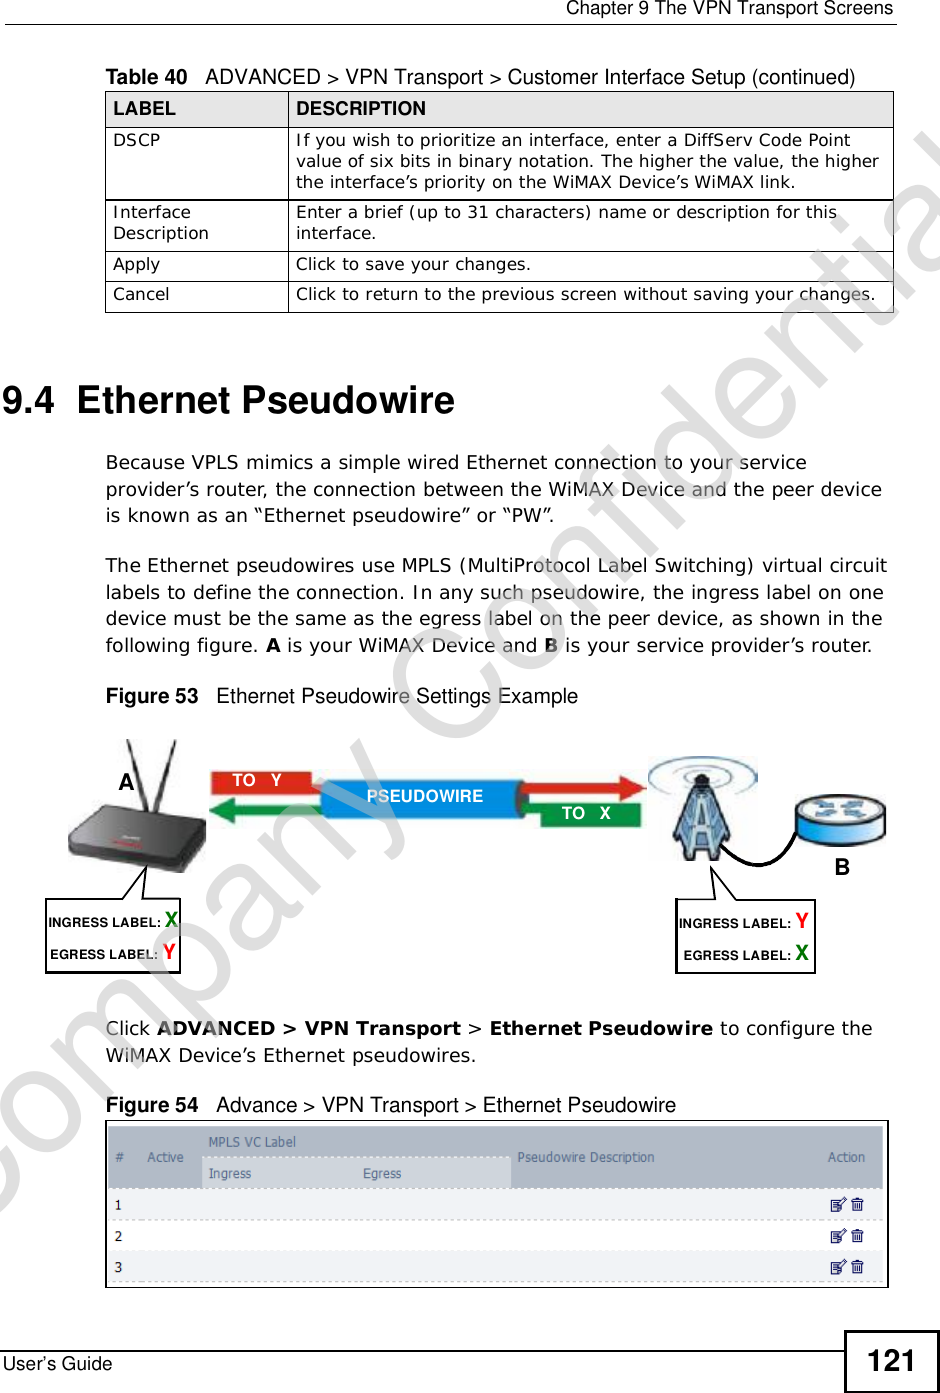  Chapter 9The VPN Transport ScreensUser’s Guide 1219.4  Ethernet PseudowireBecause VPLS mimics a simple wired Ethernet connection to your service provider’s router, the connection between the WiMAX Device and the peer device is known as an “Ethernet pseudowire” or “PW”. The Ethernet pseudowires use MPLS (MultiProtocol Label Switching) virtual circuit labels to define the connection. In any such pseudowire, the ingress label on one device must be the same as the egress label on the peer device, as shown in the following figure. A is your WiMAX Device and B is your service provider’s router.Figure 53   Ethernet Pseudowire Settings Example Click ADVANCED &gt;VPN Transport &gt; Ethernet Pseudowire to configure the WiMAX Device’s Ethernet pseudowires.Figure 54   Advance &gt; VPN Transport &gt; Ethernet PseudowireDSCPIf you wish to prioritize an interface, enter a DiffServ Code Point value of six bits in binary notation. The higher the value, the higher the interface’s priority on the WiMAX Device’s WiMAX link.Interface Description Enter a brief (up to 31 characters) name or description for this interface.ApplyClick to save your changes.CancelClick to return to the previous screen without saving your changes.Table 40   ADVANCED &gt; VPN Transport &gt; Customer Interface Setup (continued)LABEL DESCRIPTIONINGRESS LABEL: XEGRESS LABEL: YINGRESS LABEL: YEGRESS LABEL: XPSEUDOWIRETO   YTO   XABCompany Confidential